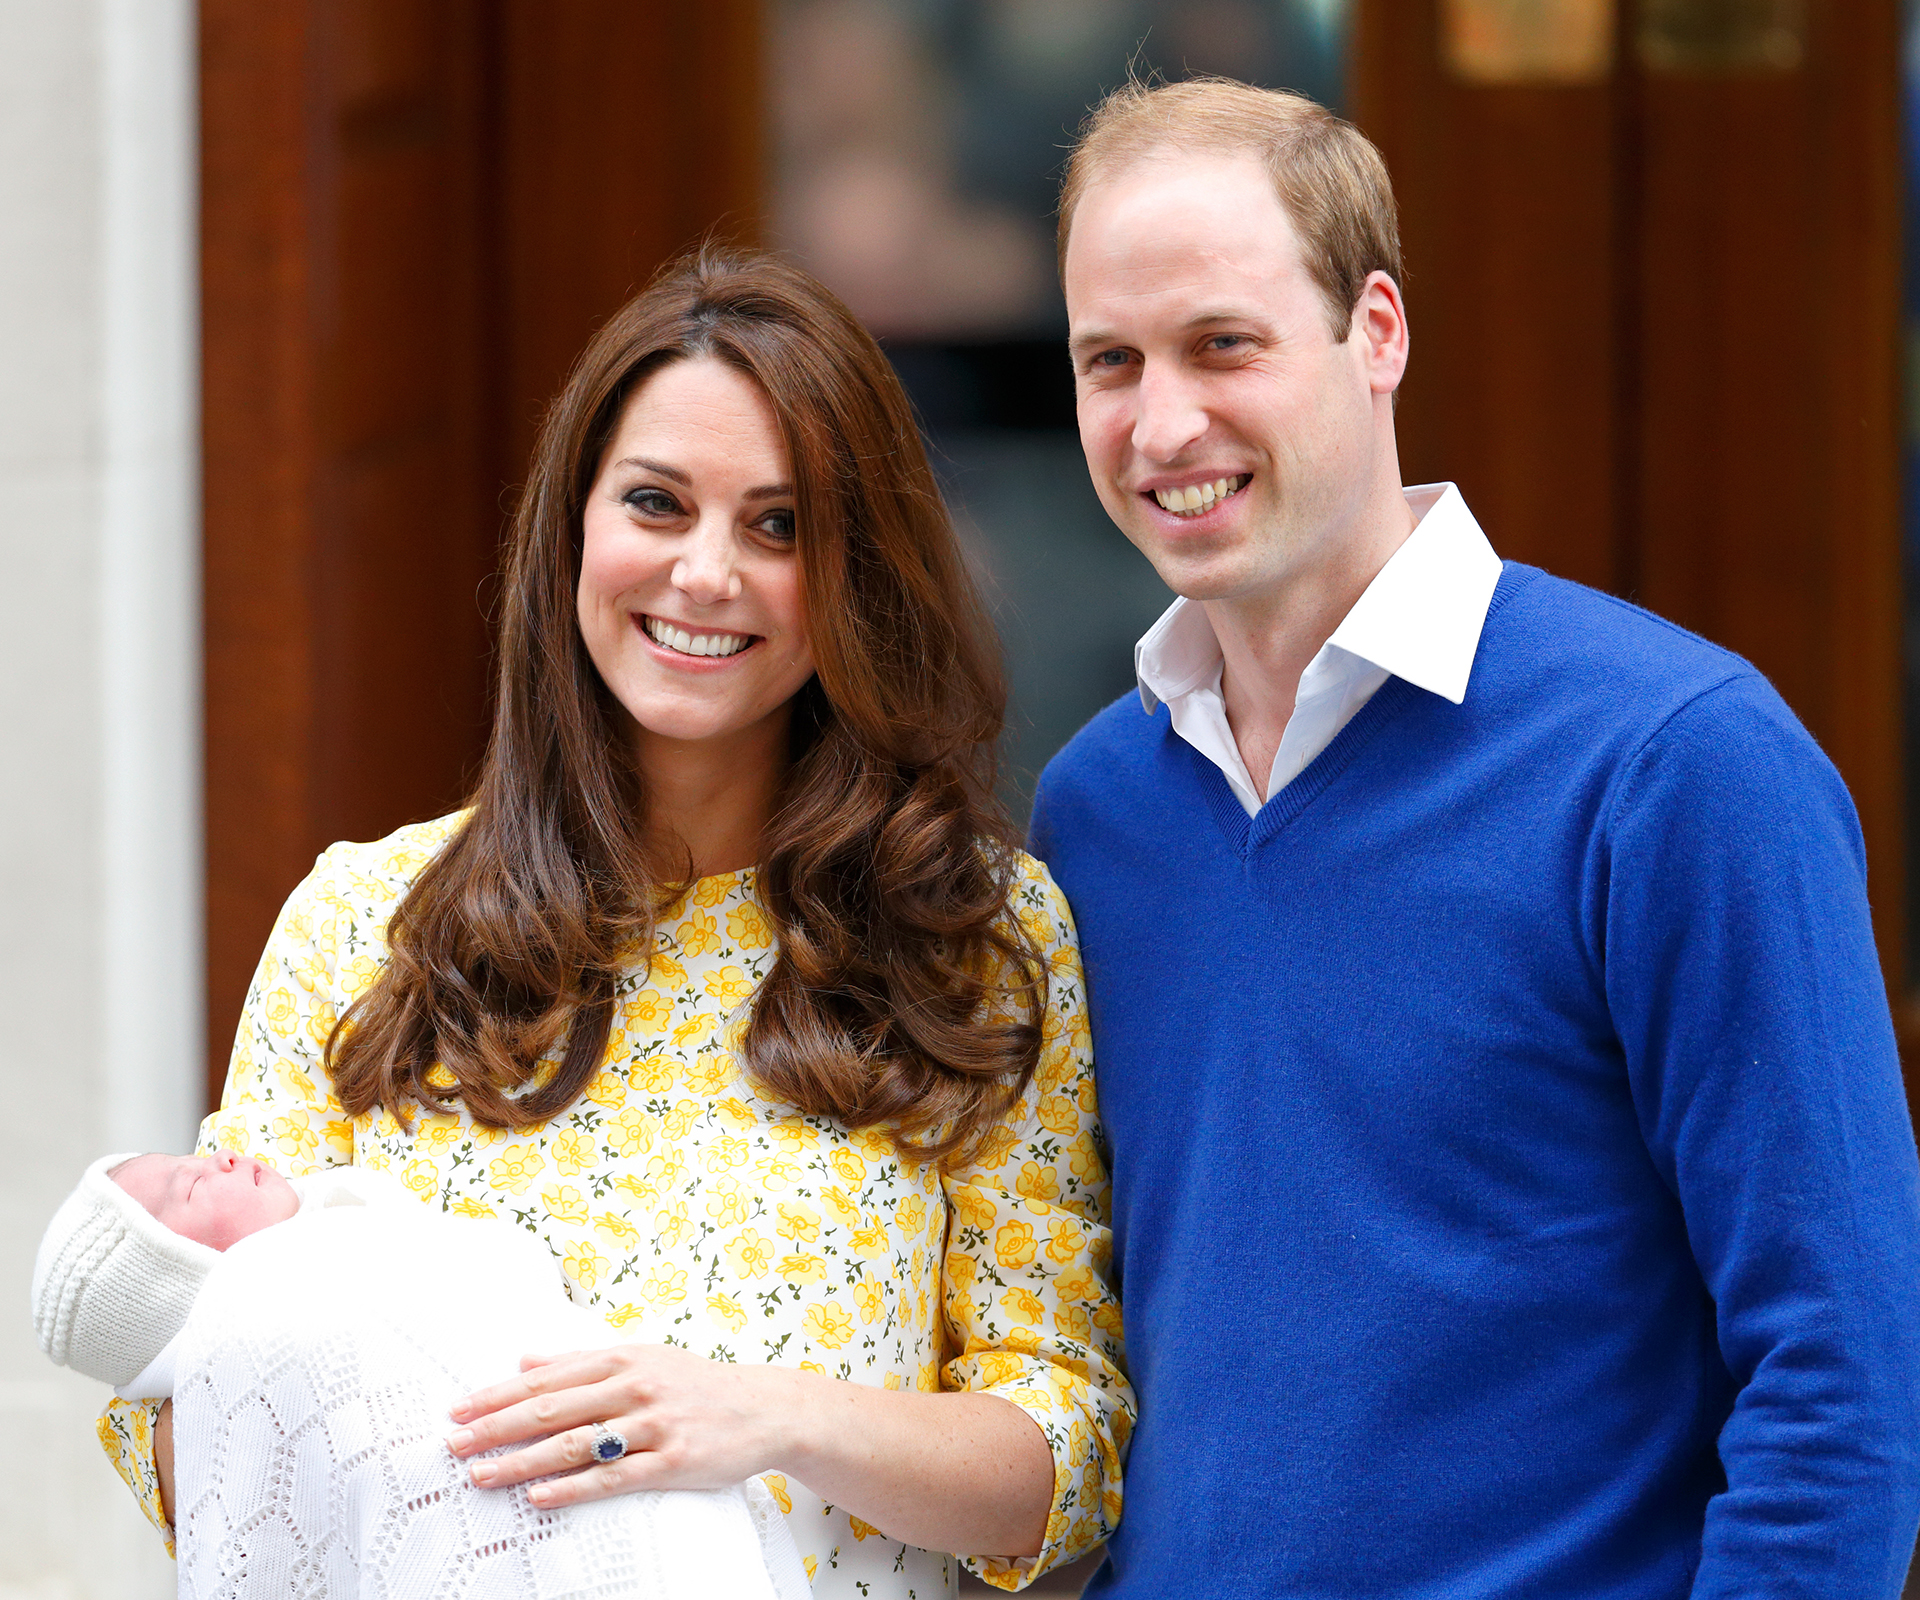 The ‘Kate Effect’ strikes again: sales of yellow dresses rise 208 percent